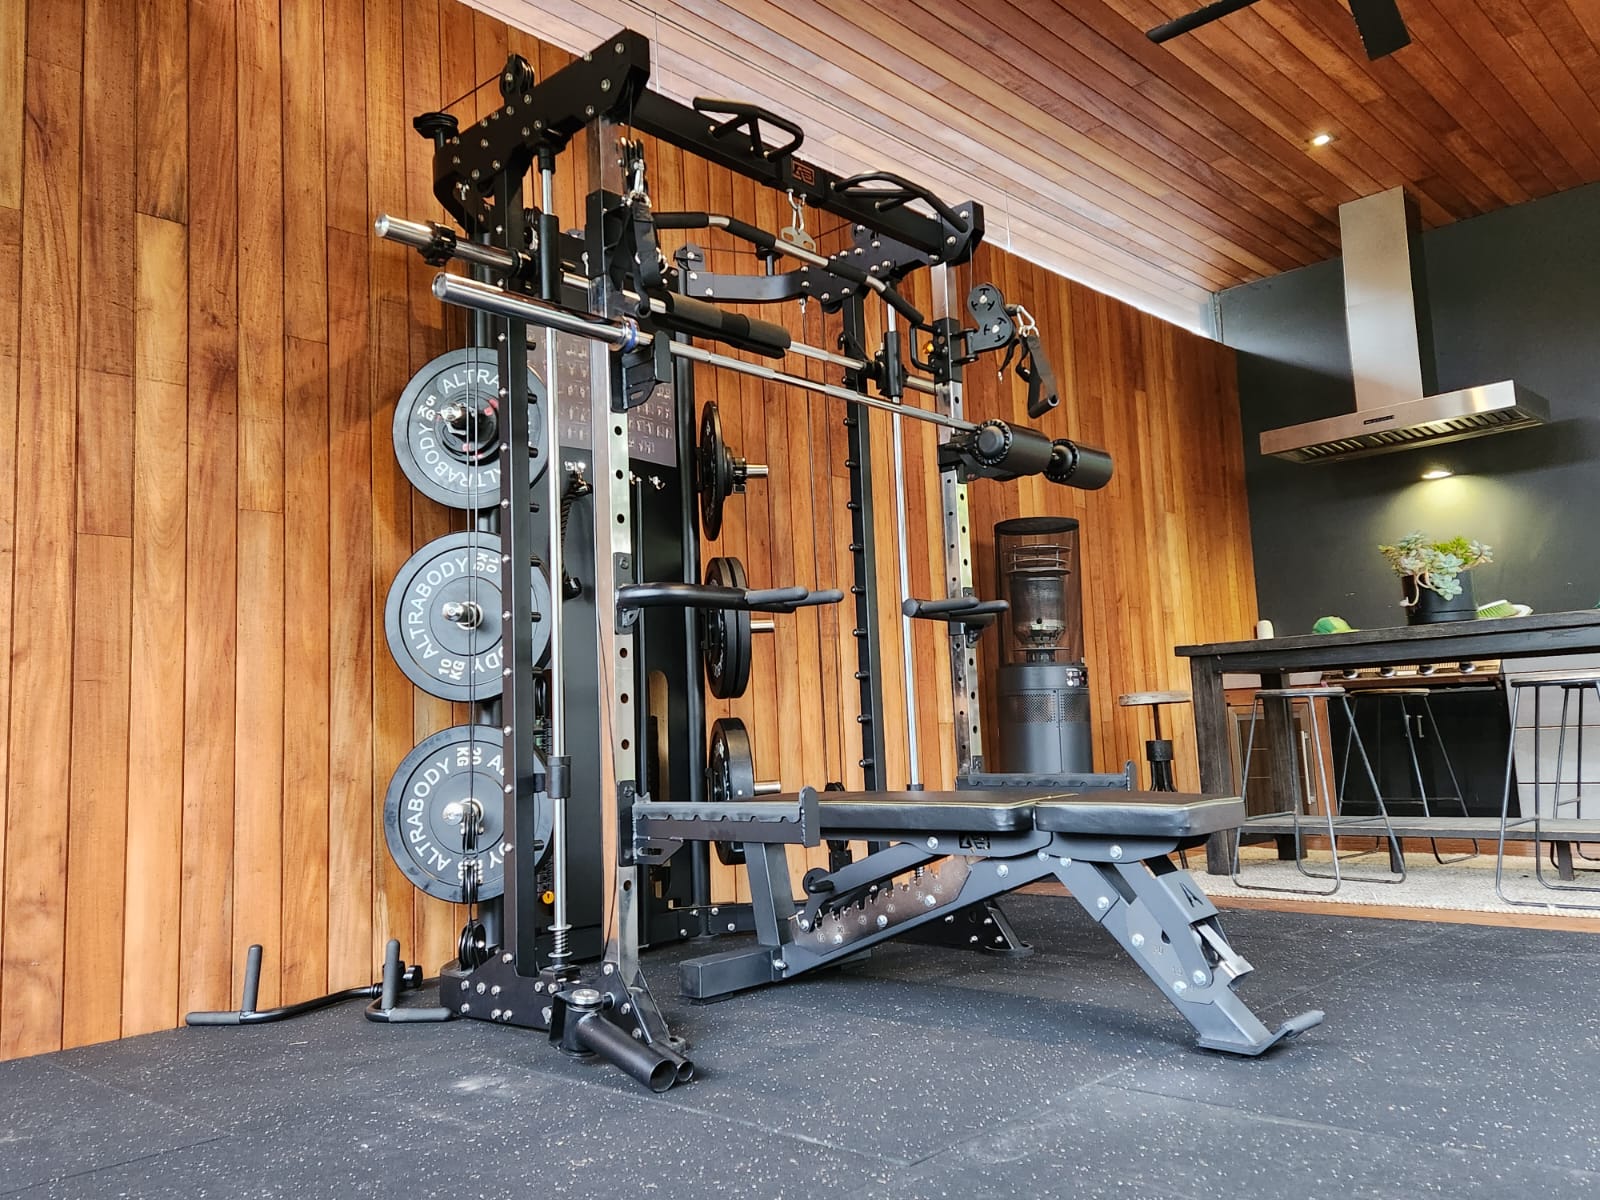 Building Your Home Gym. Everything you need to consider when…